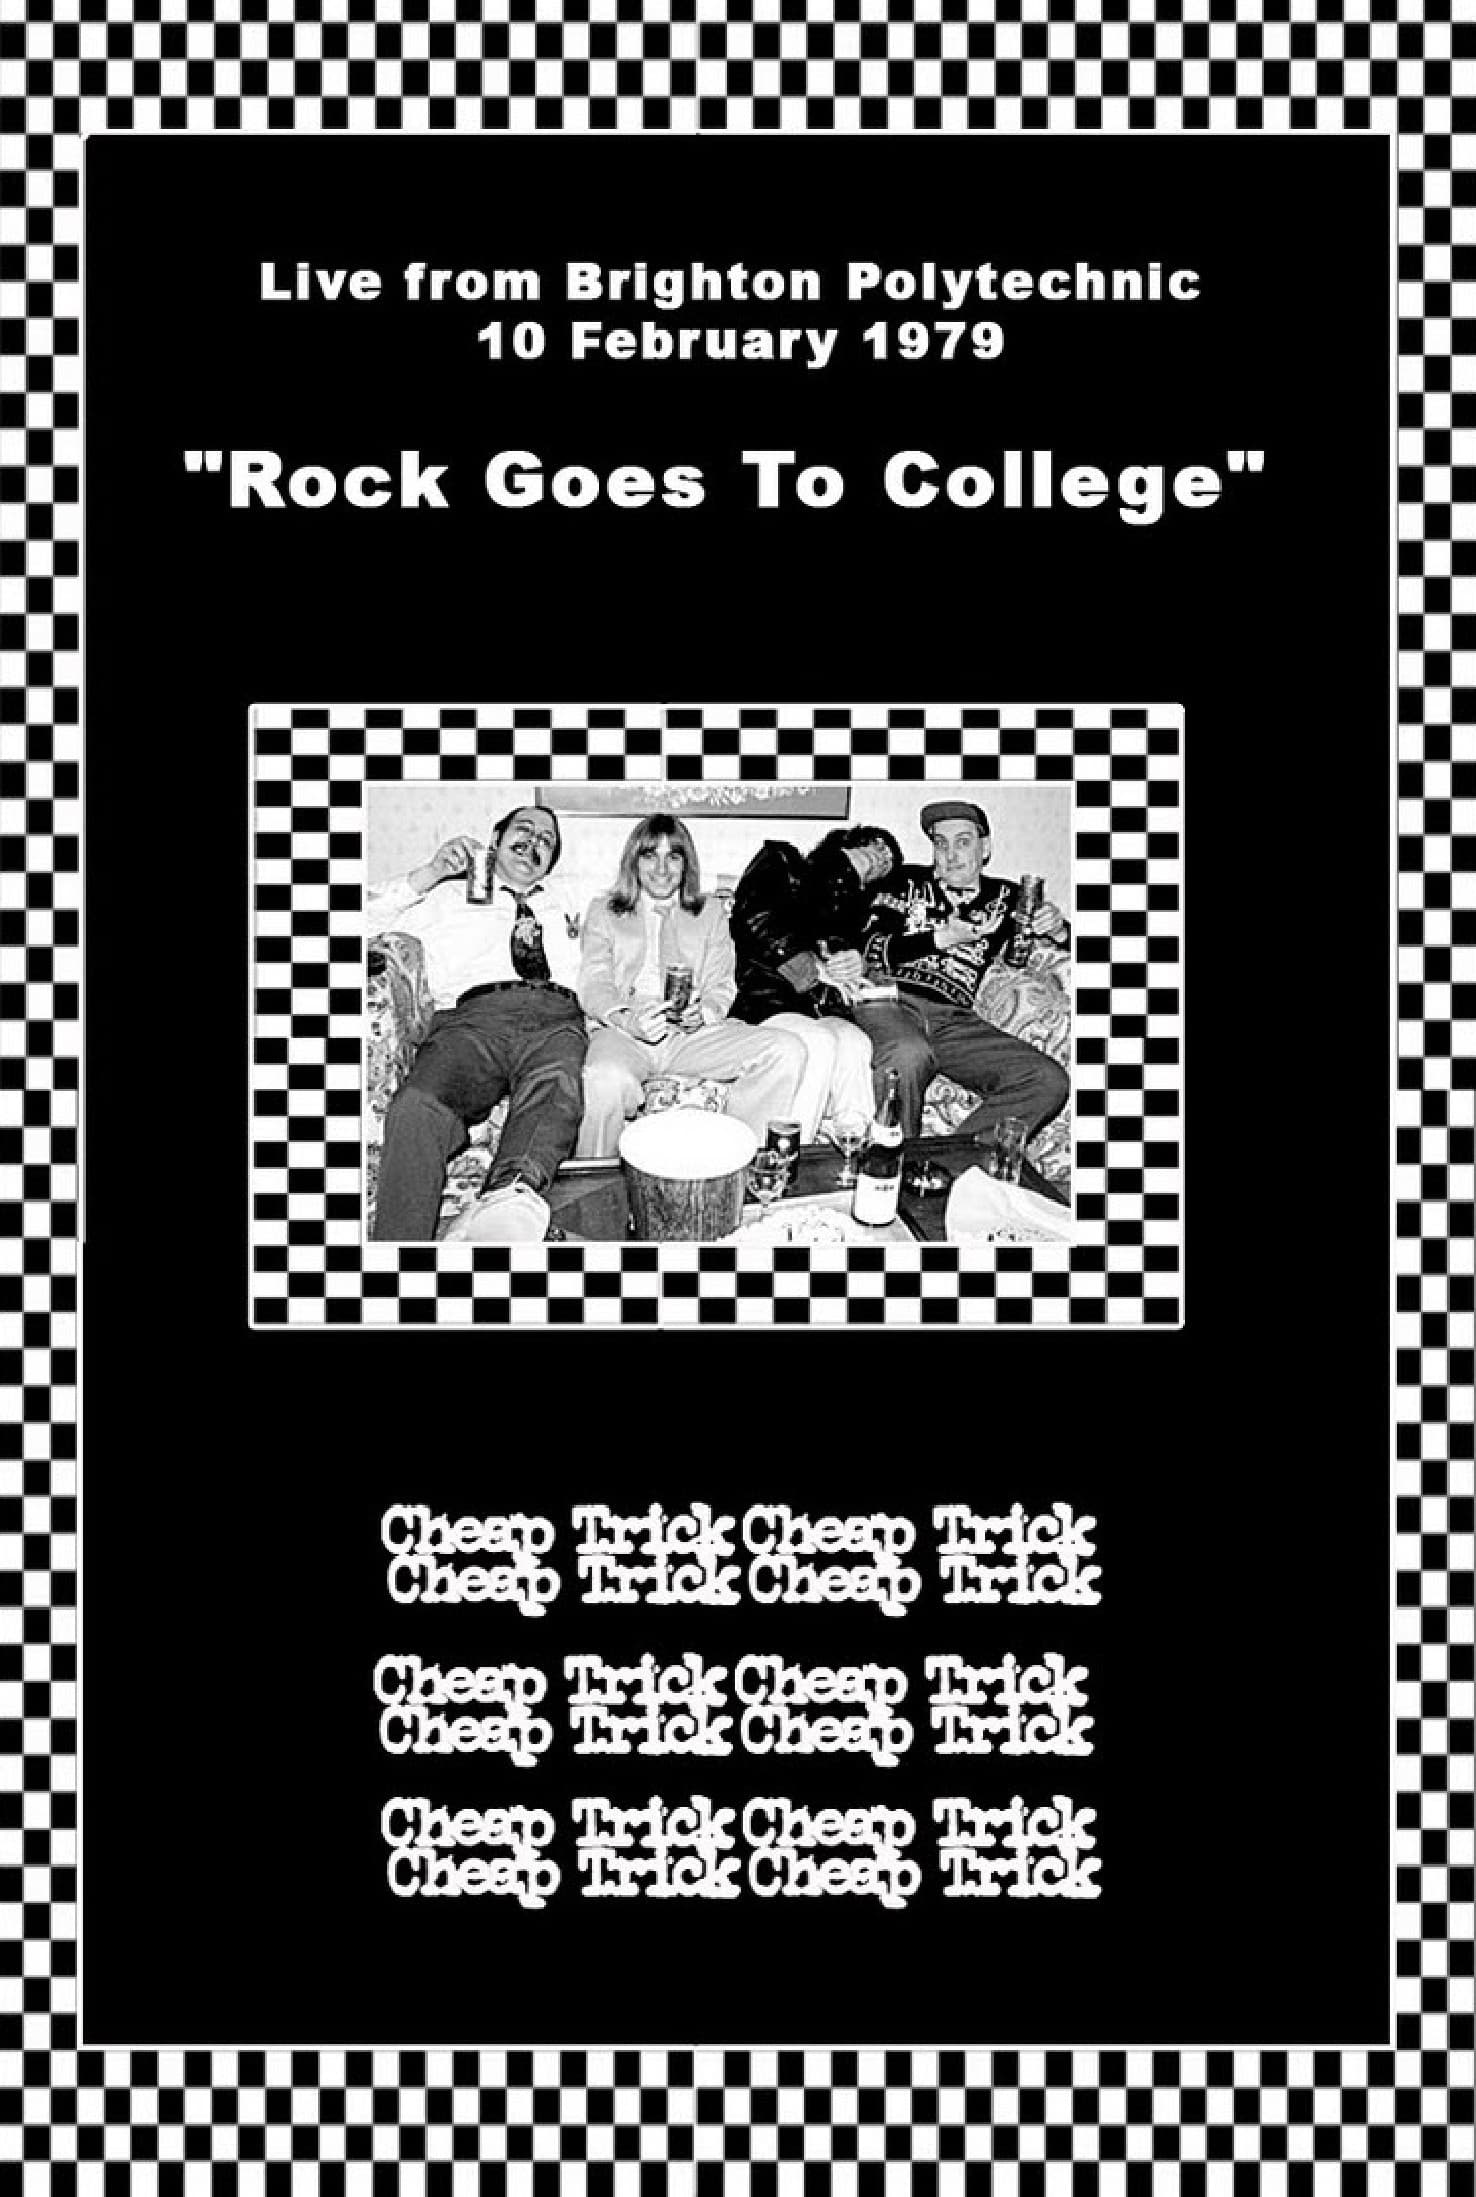 Cheap Trick: Rock Goes to College